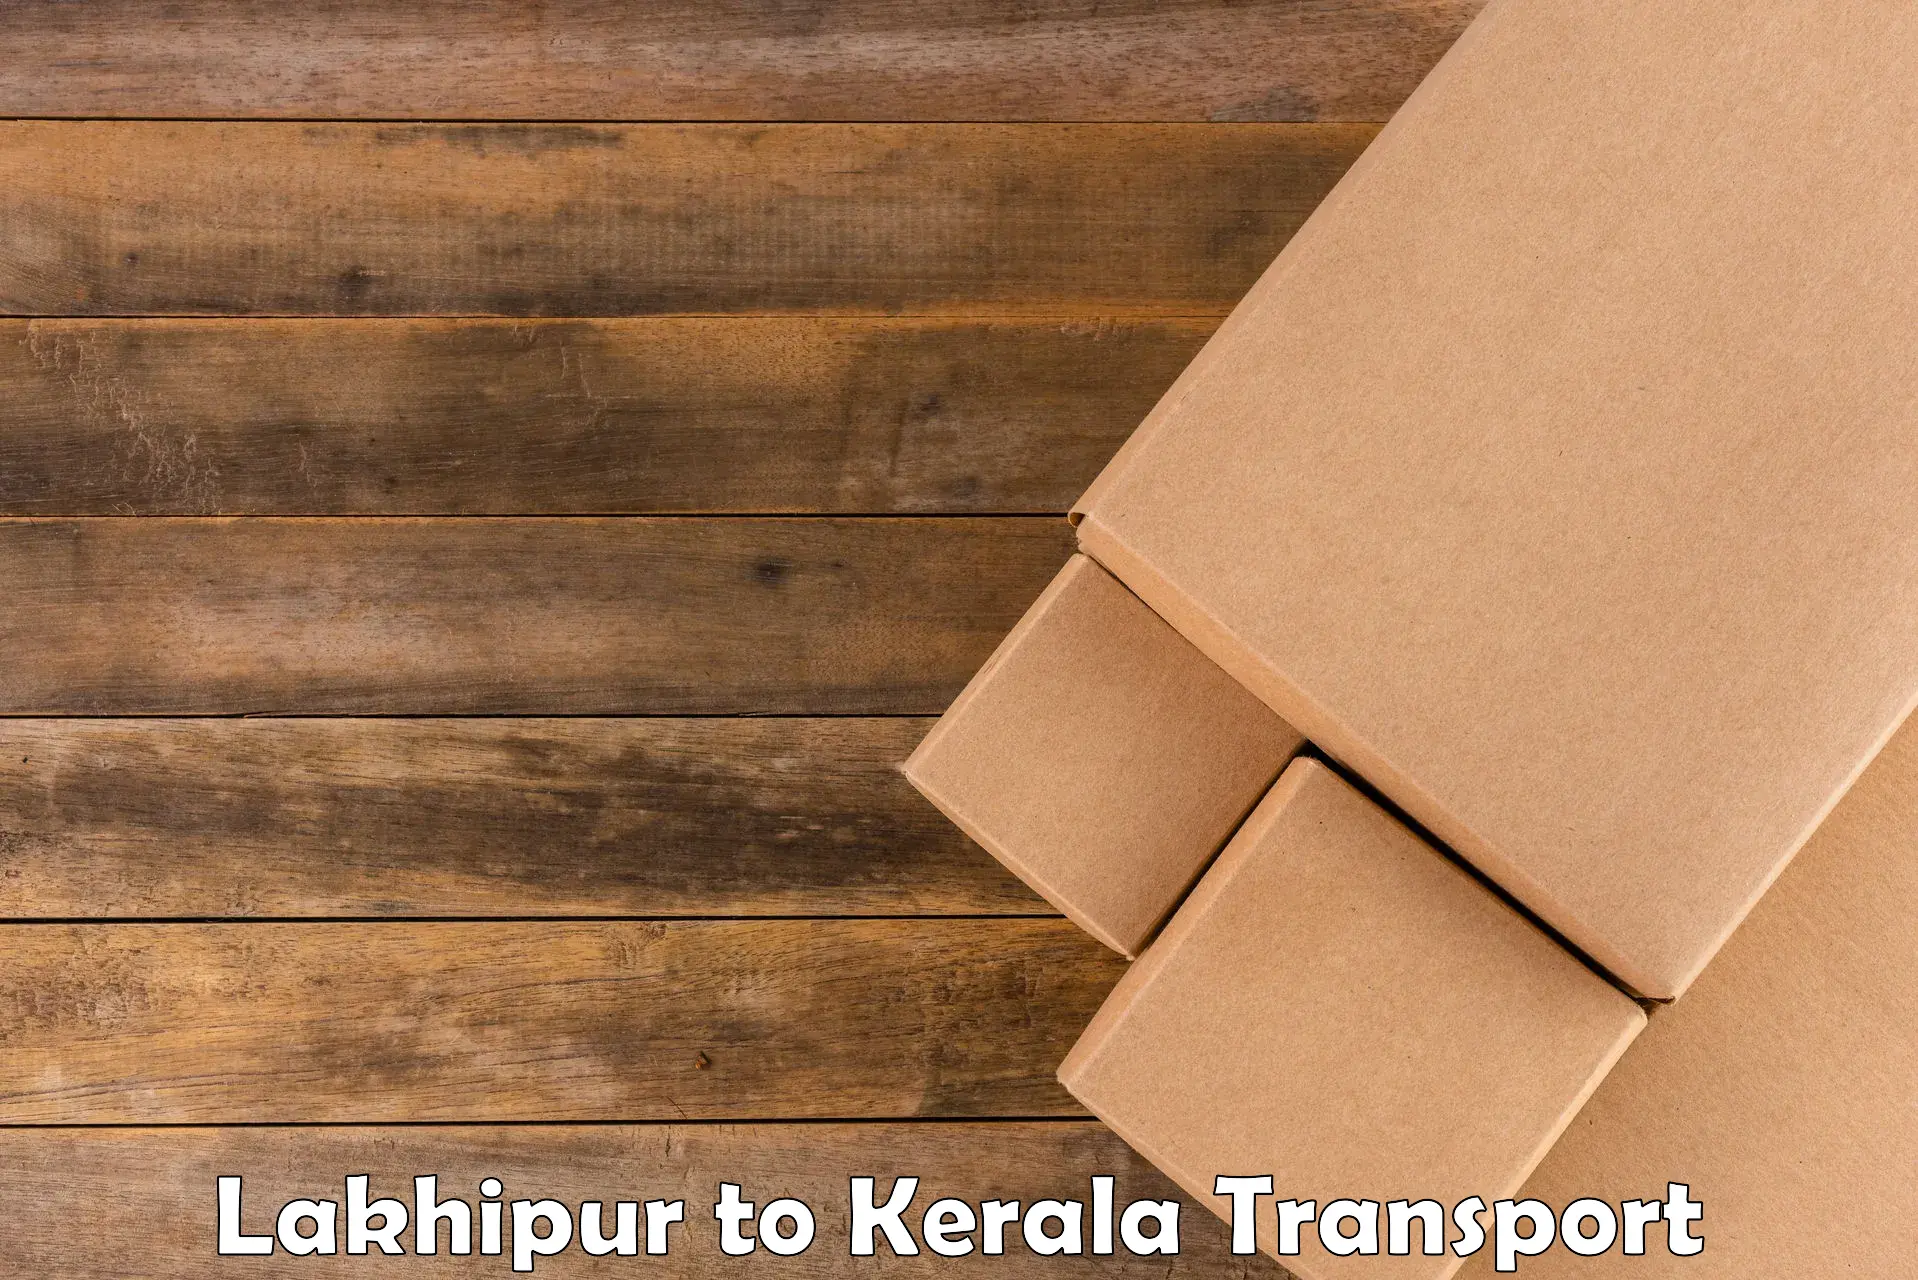 Air freight transport services in Lakhipur to Koothattukulam